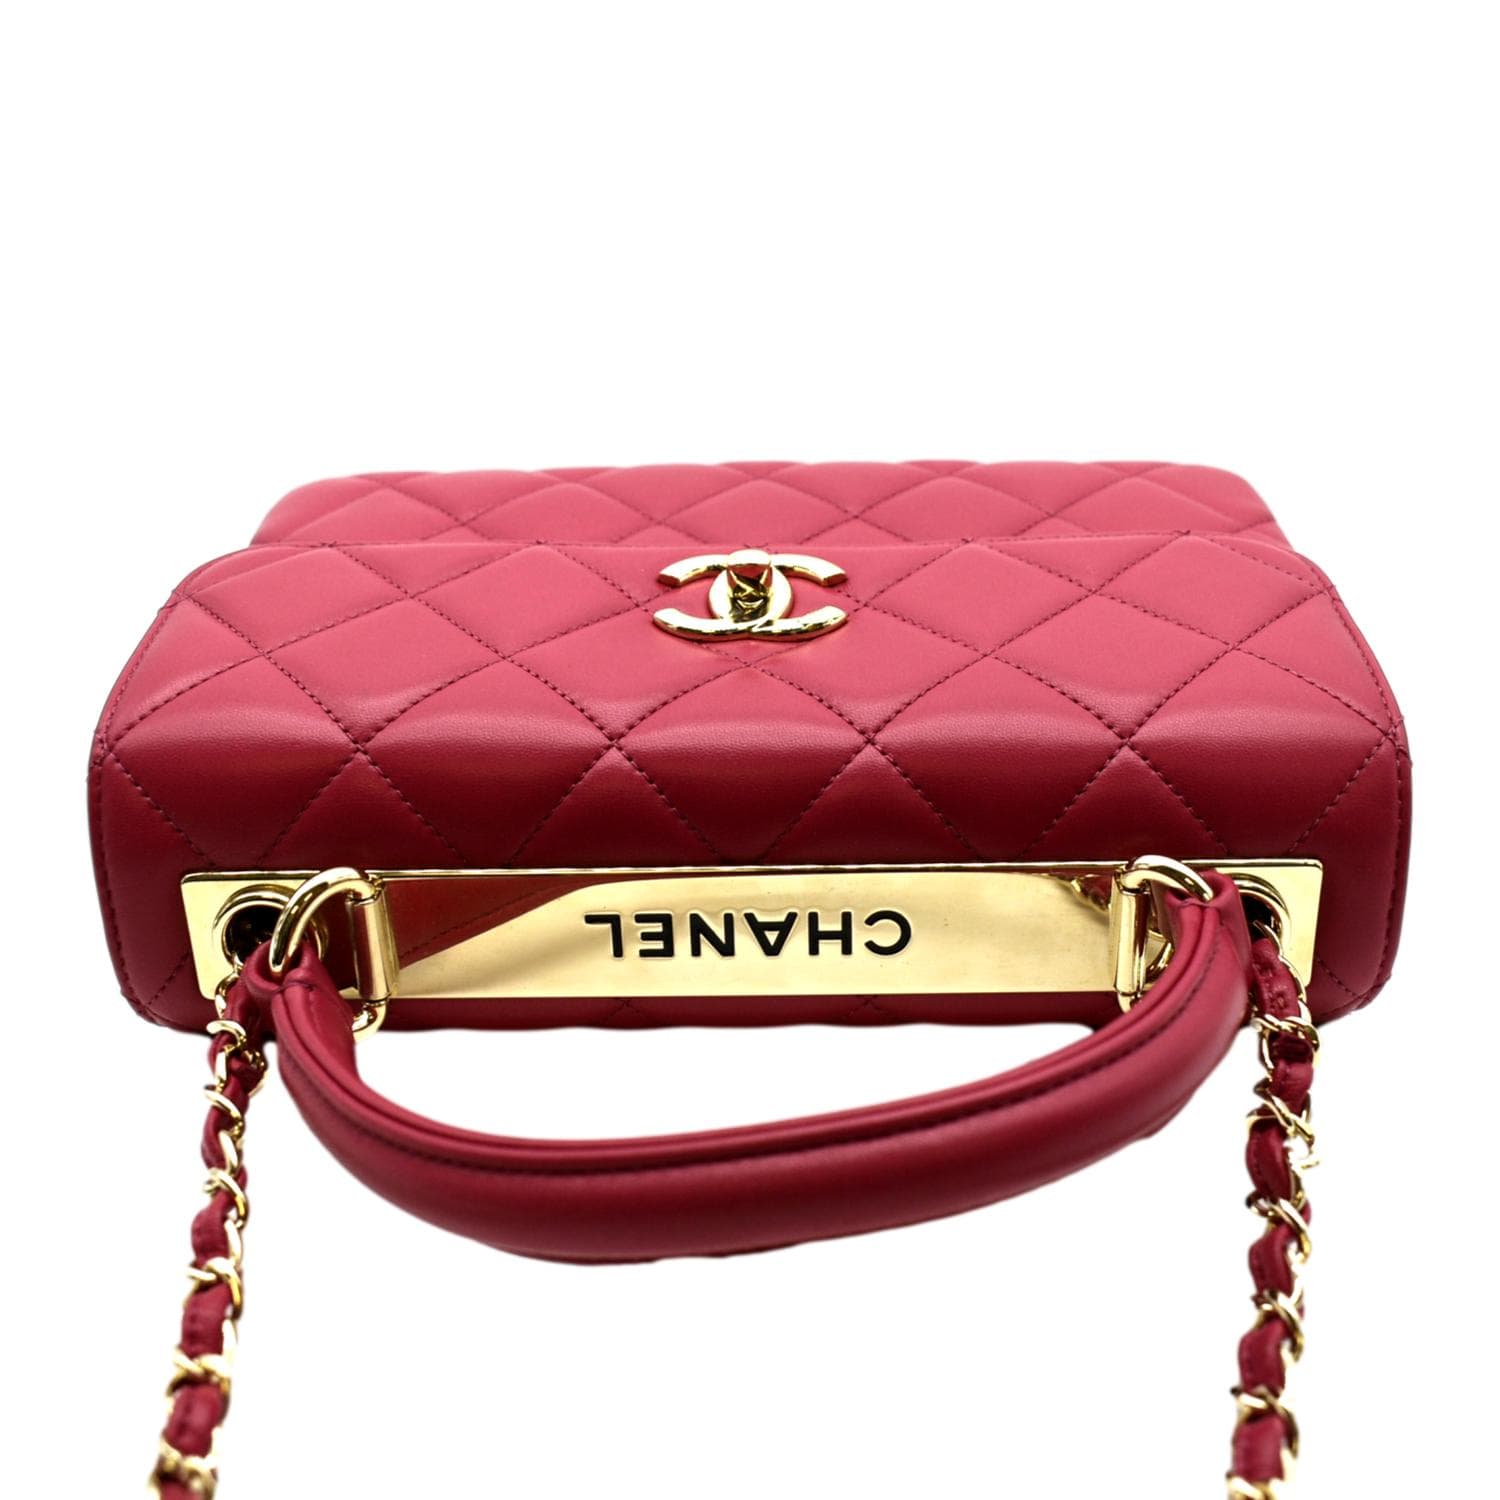 Chanel Top Handle Wallet On Chain WOC Pink Caviar Gold Hardware 22S – Coco  Approved Studio